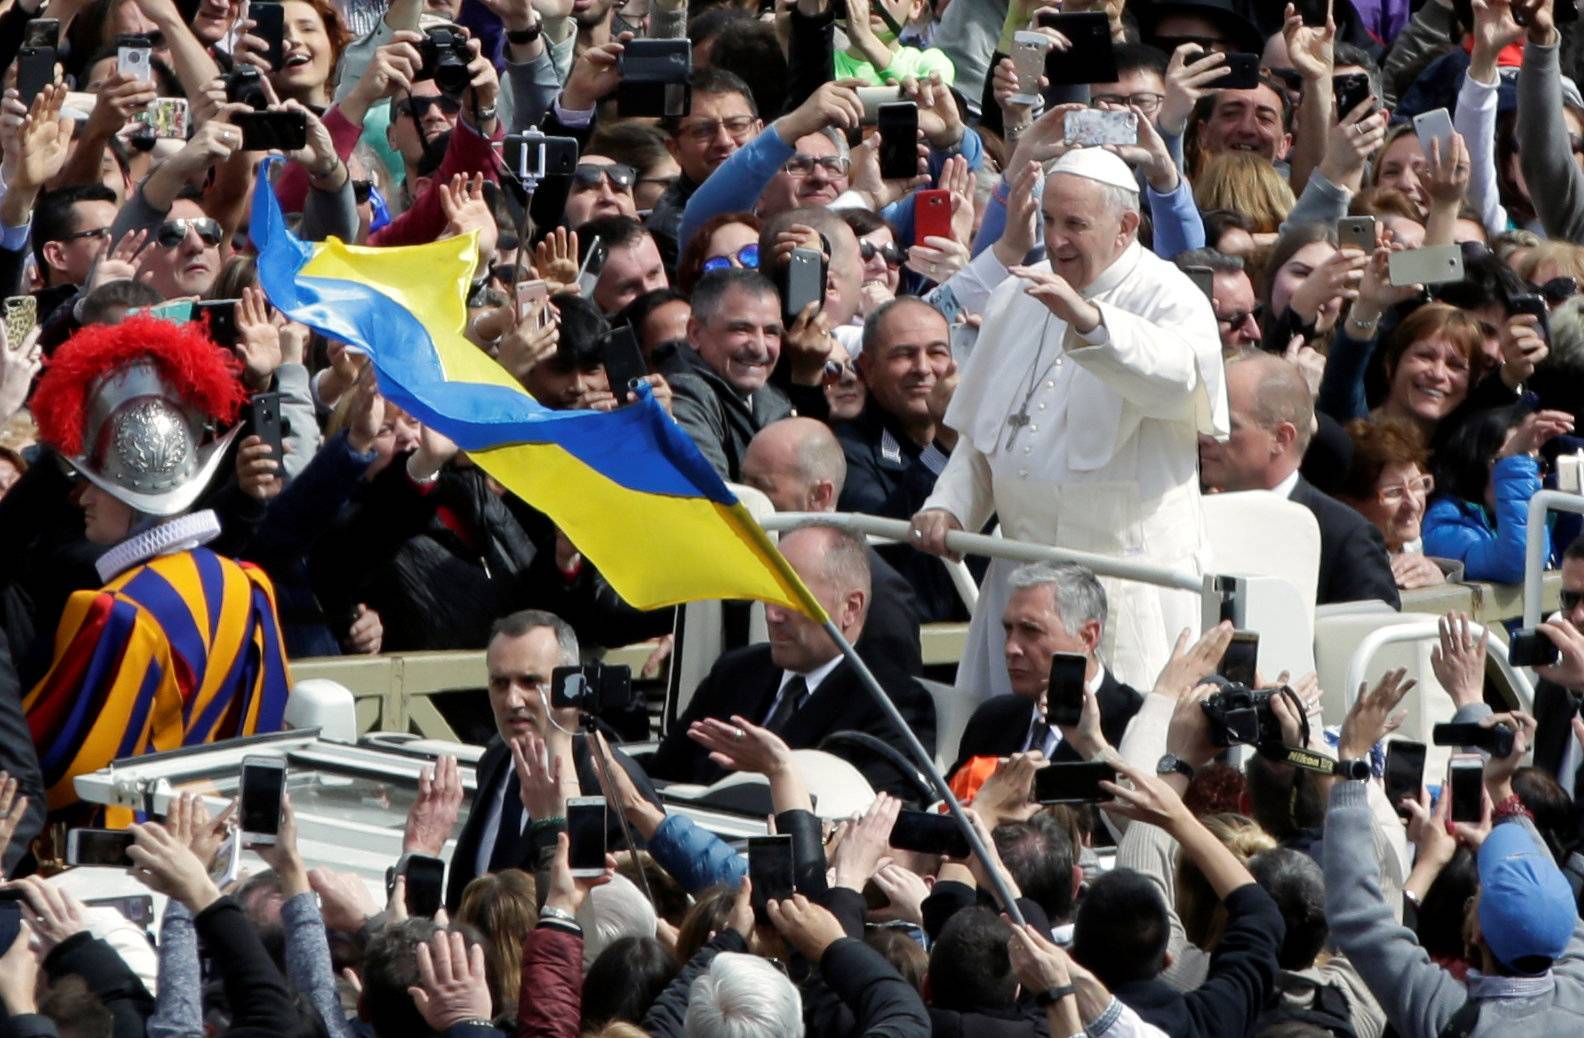 Pope Francis greets faithful from his Papamobile after the Easter Mass at St. Peter's Square at the Vatican